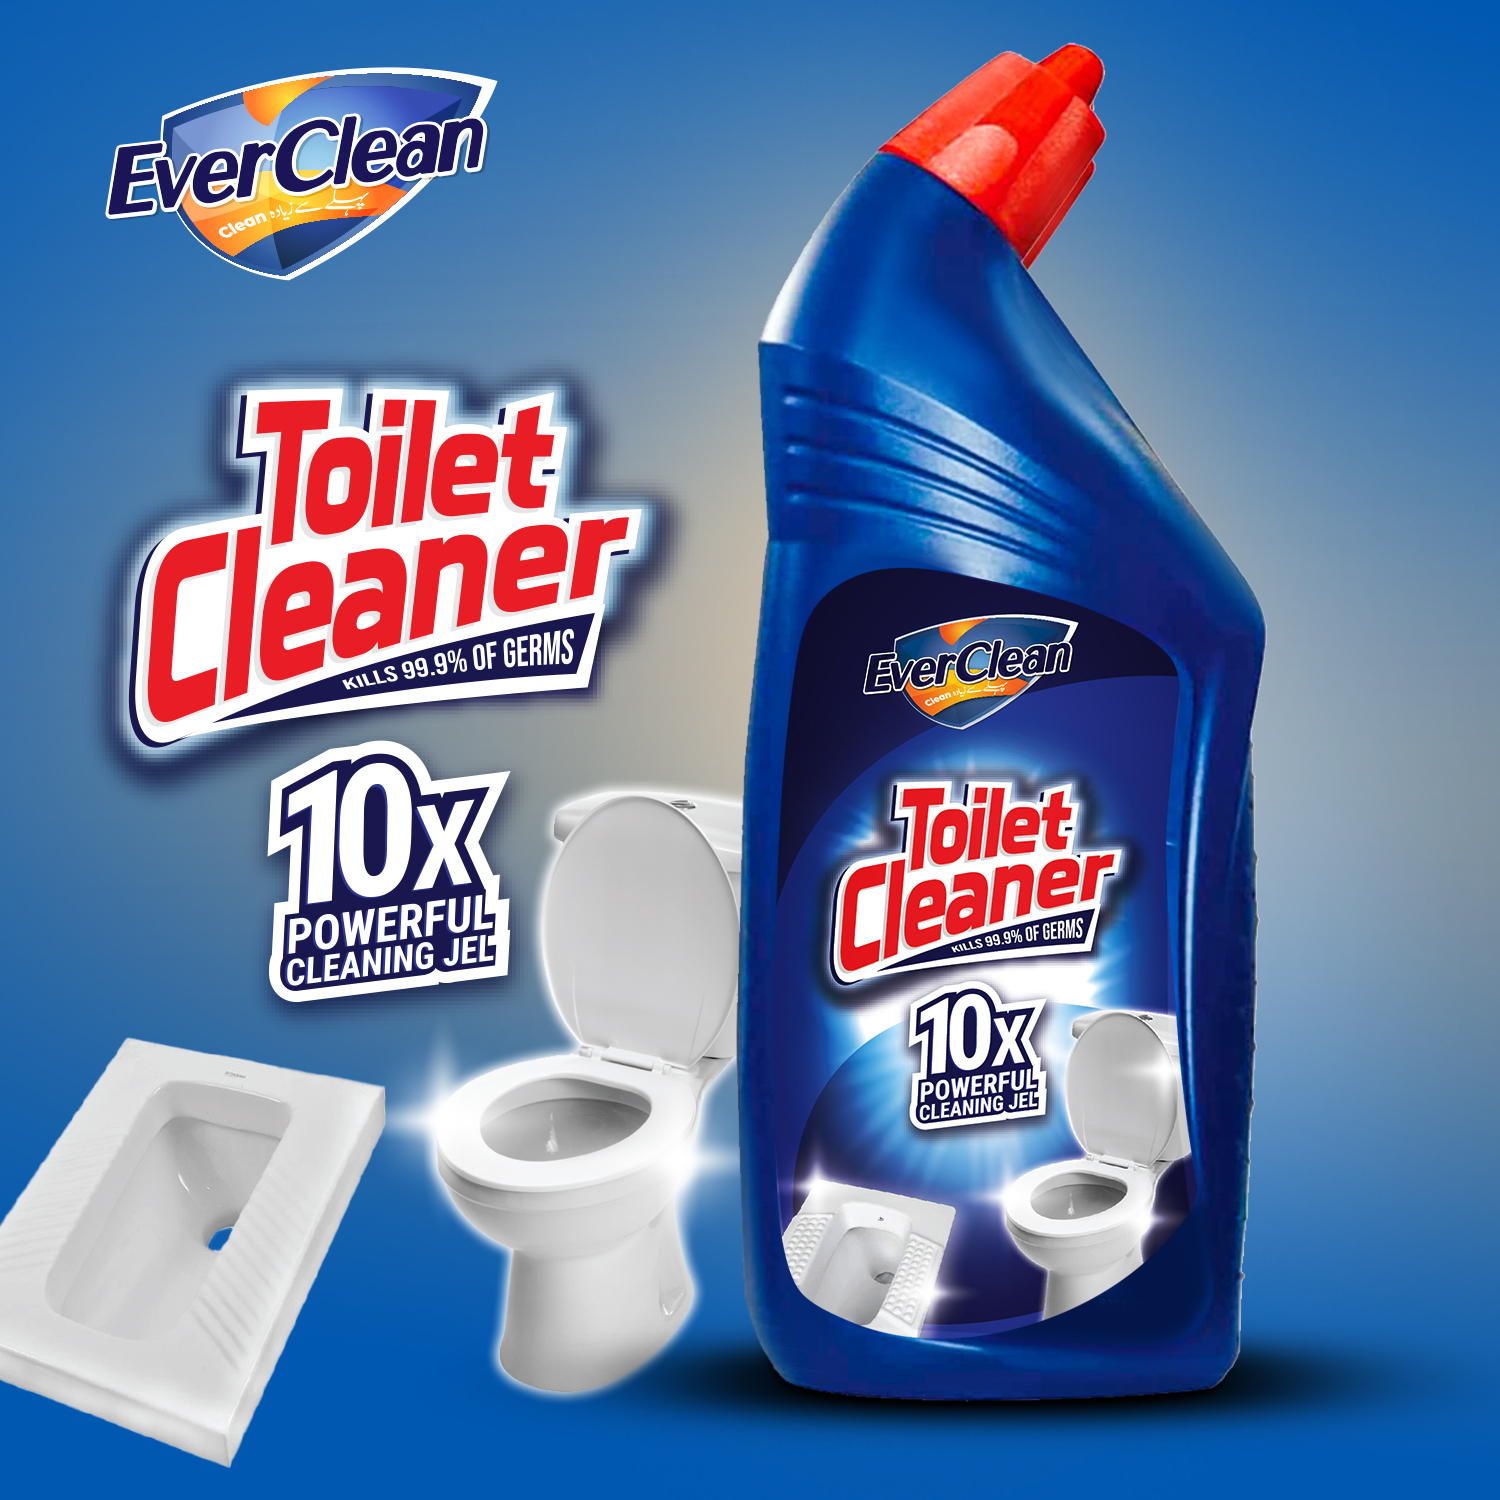 Ever Clean Toilet Cleaner - Bathroom Cleaner - Tiles Cleaner - Toilet Stain Remover - Liquid Kills 100% Germs - Toilet Cleaner 500ml